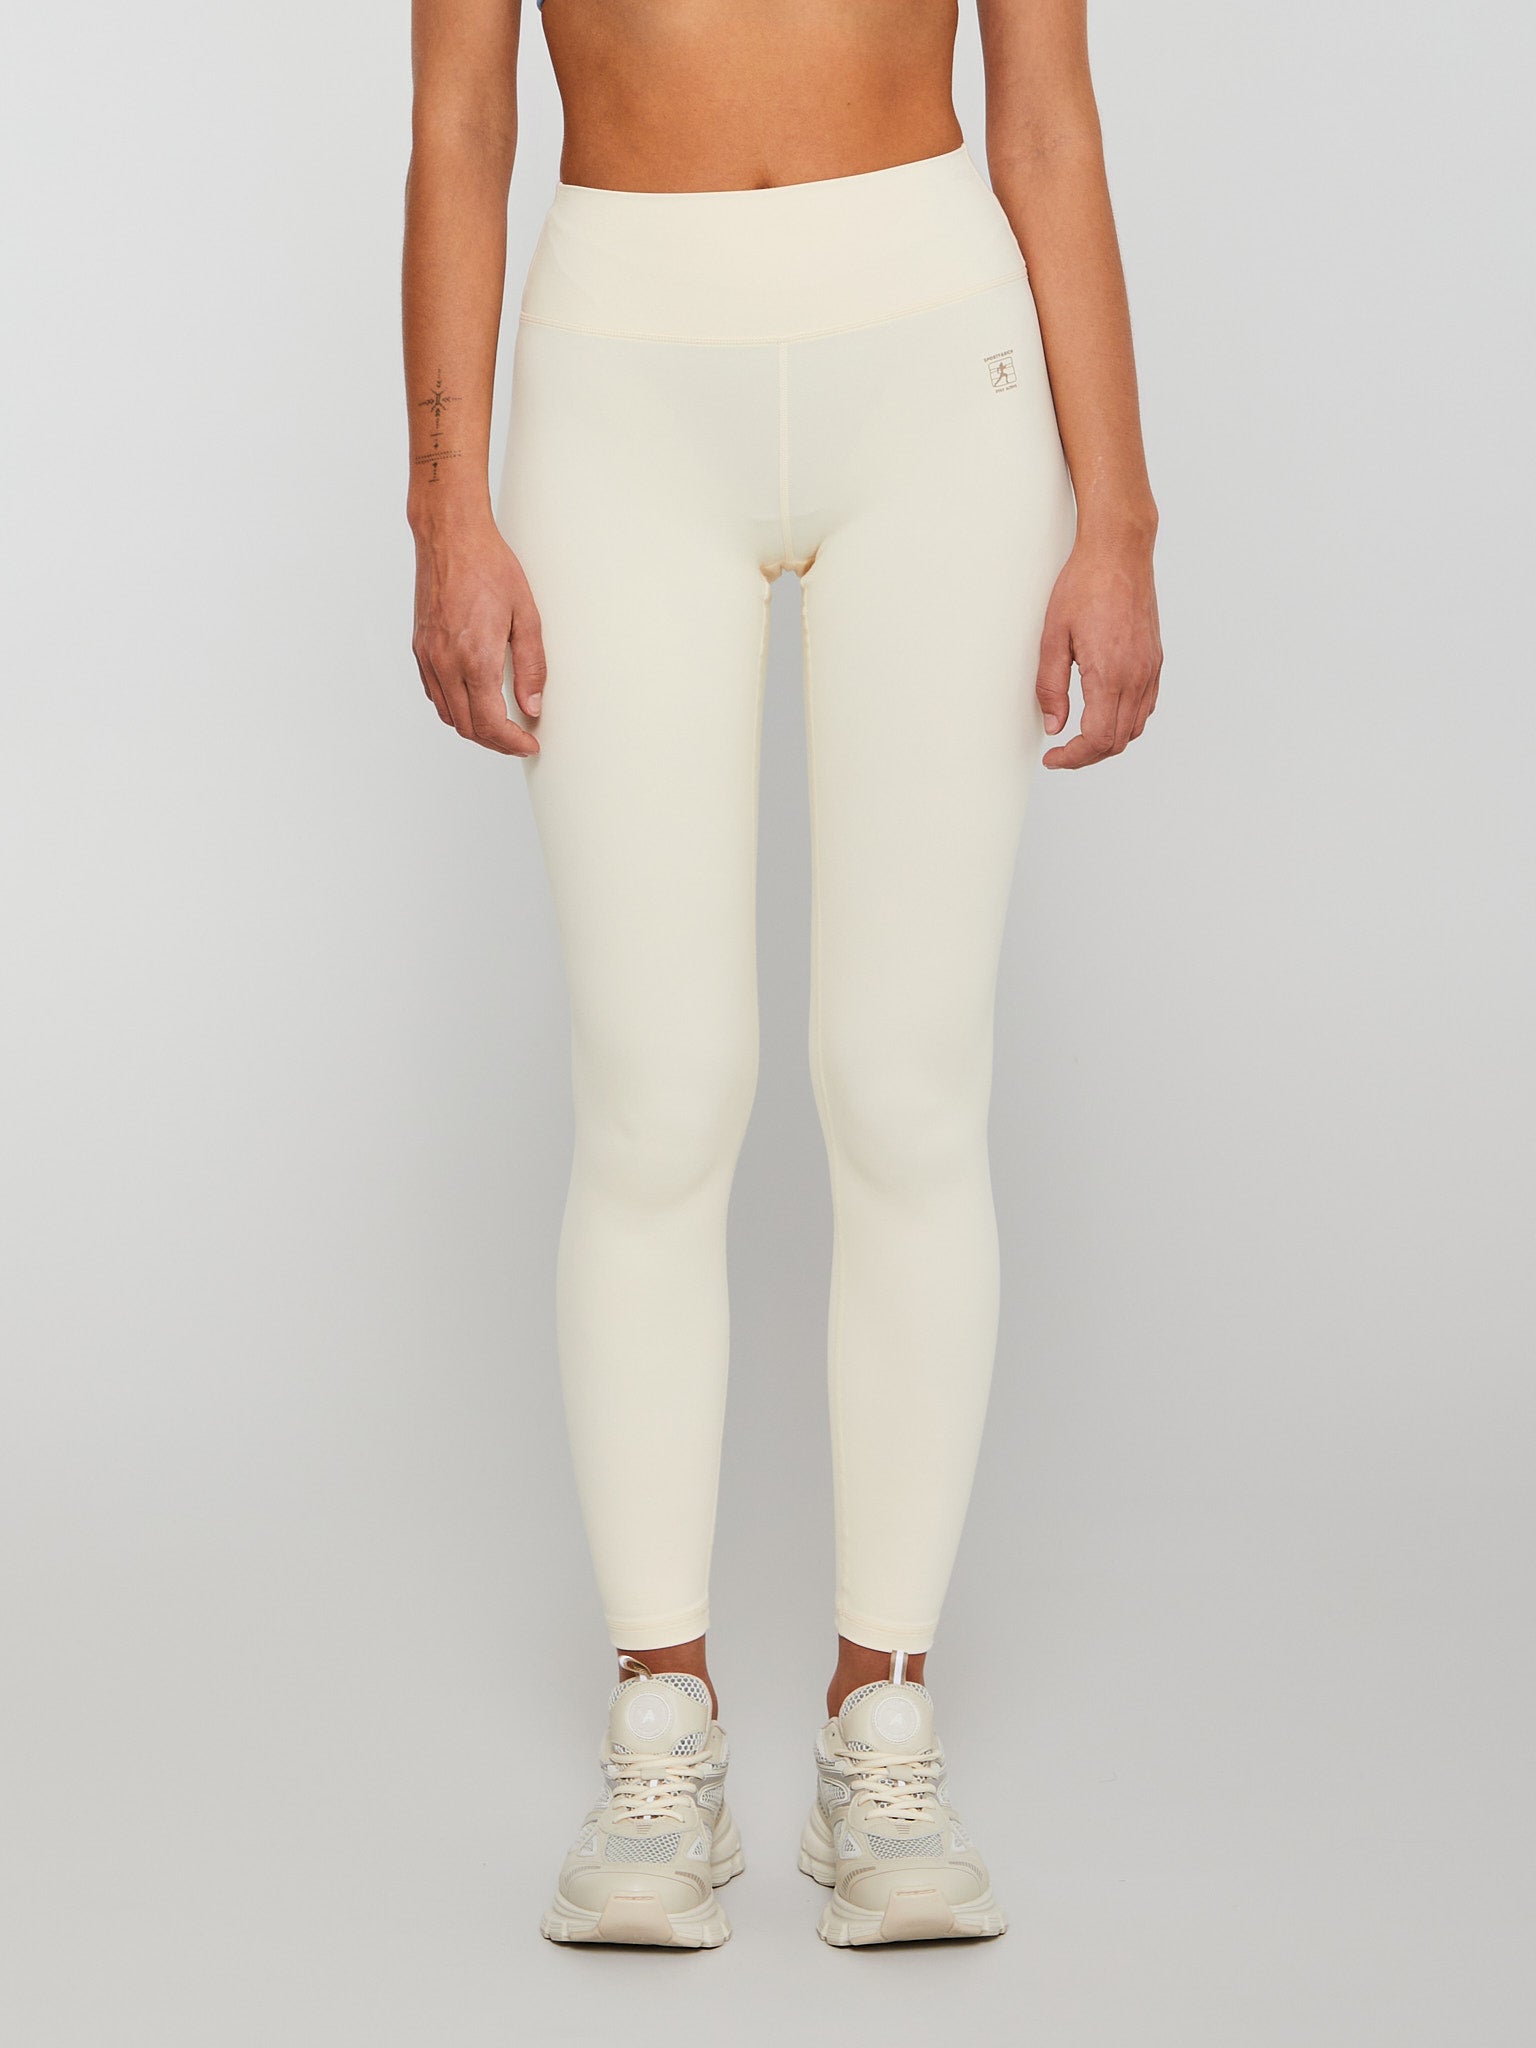 SSENSE Exclusive Gray Leggings by Sporty & Rich on Sale